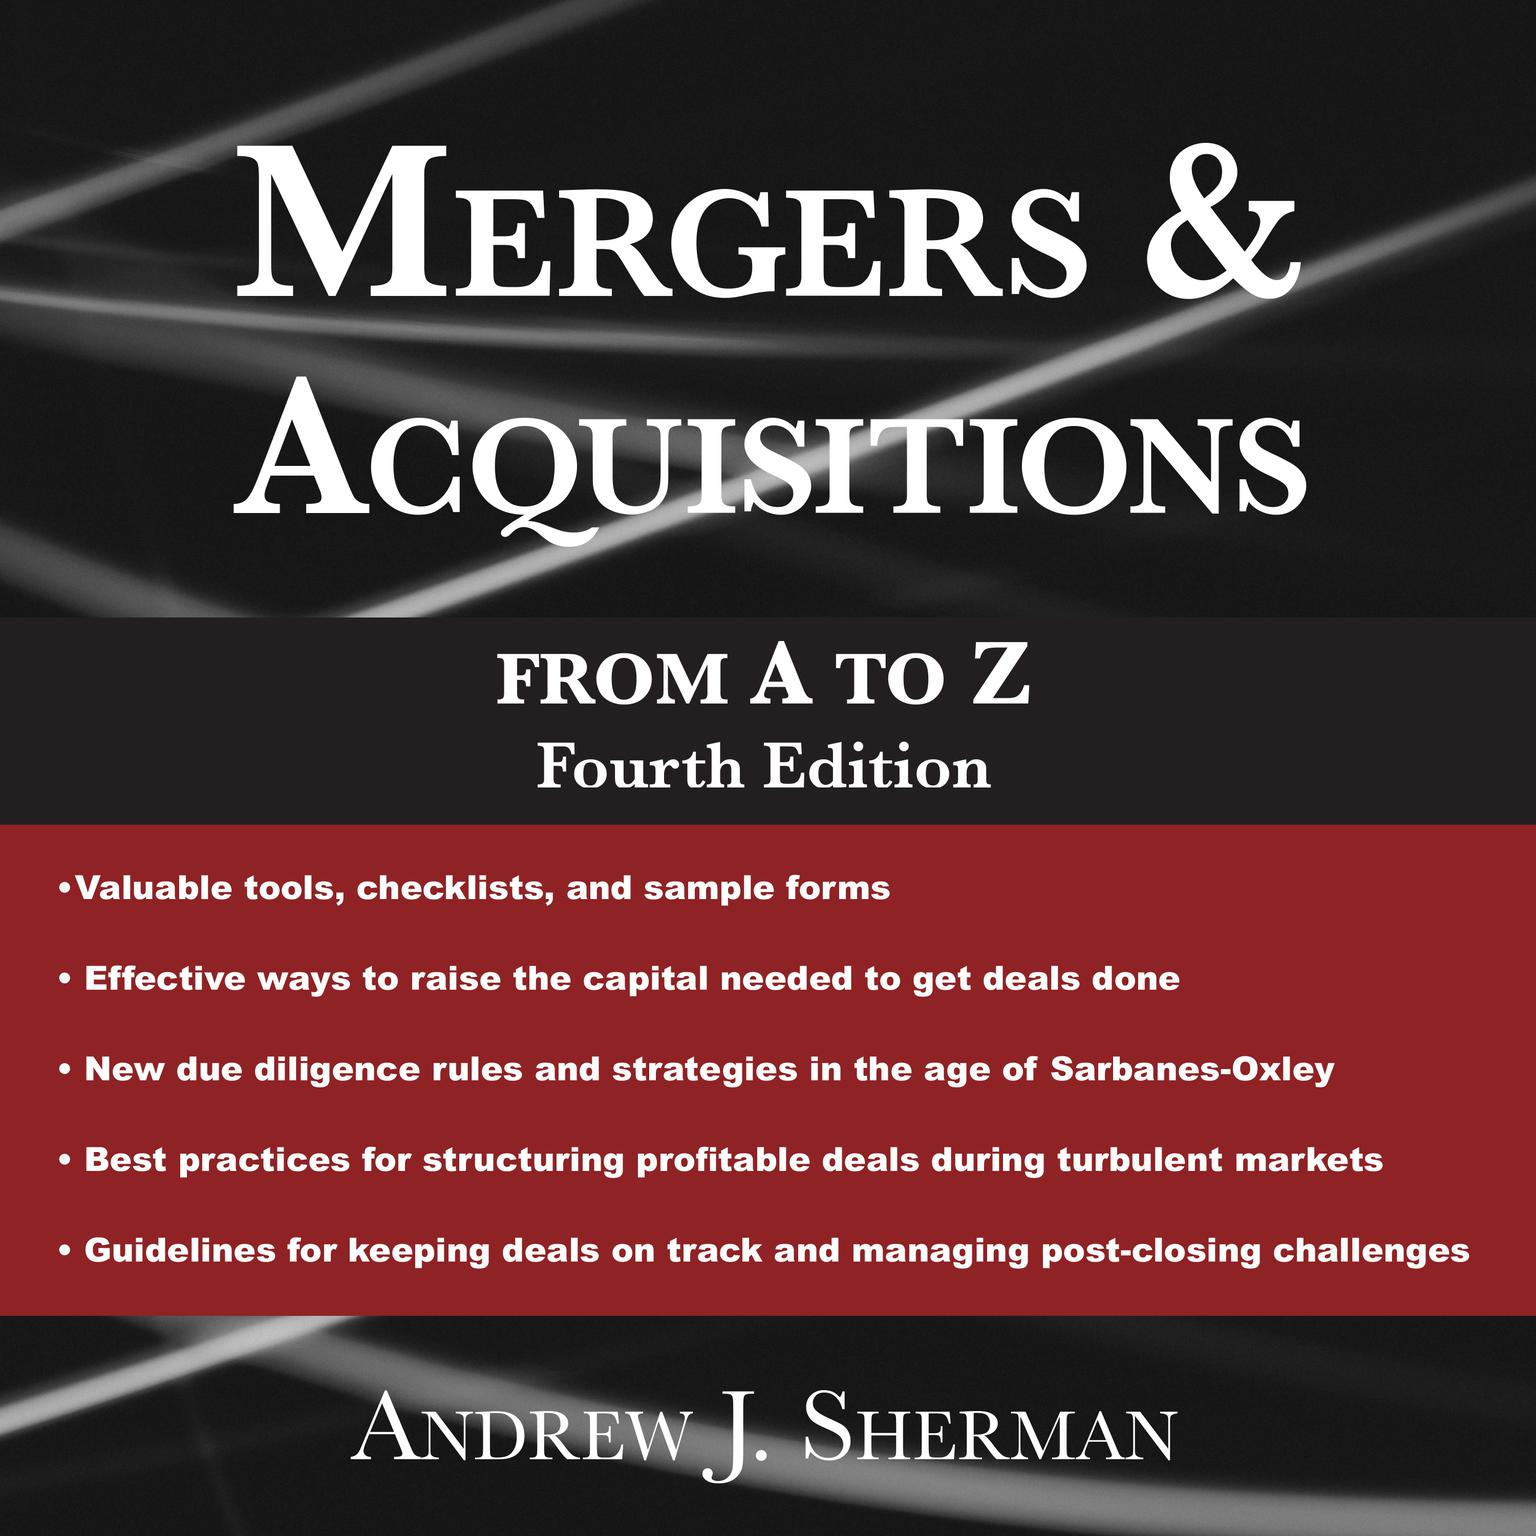 Mergers & Acquisitions from A to Z Fourth Edition Audiobook, by Andrew J. Sherman